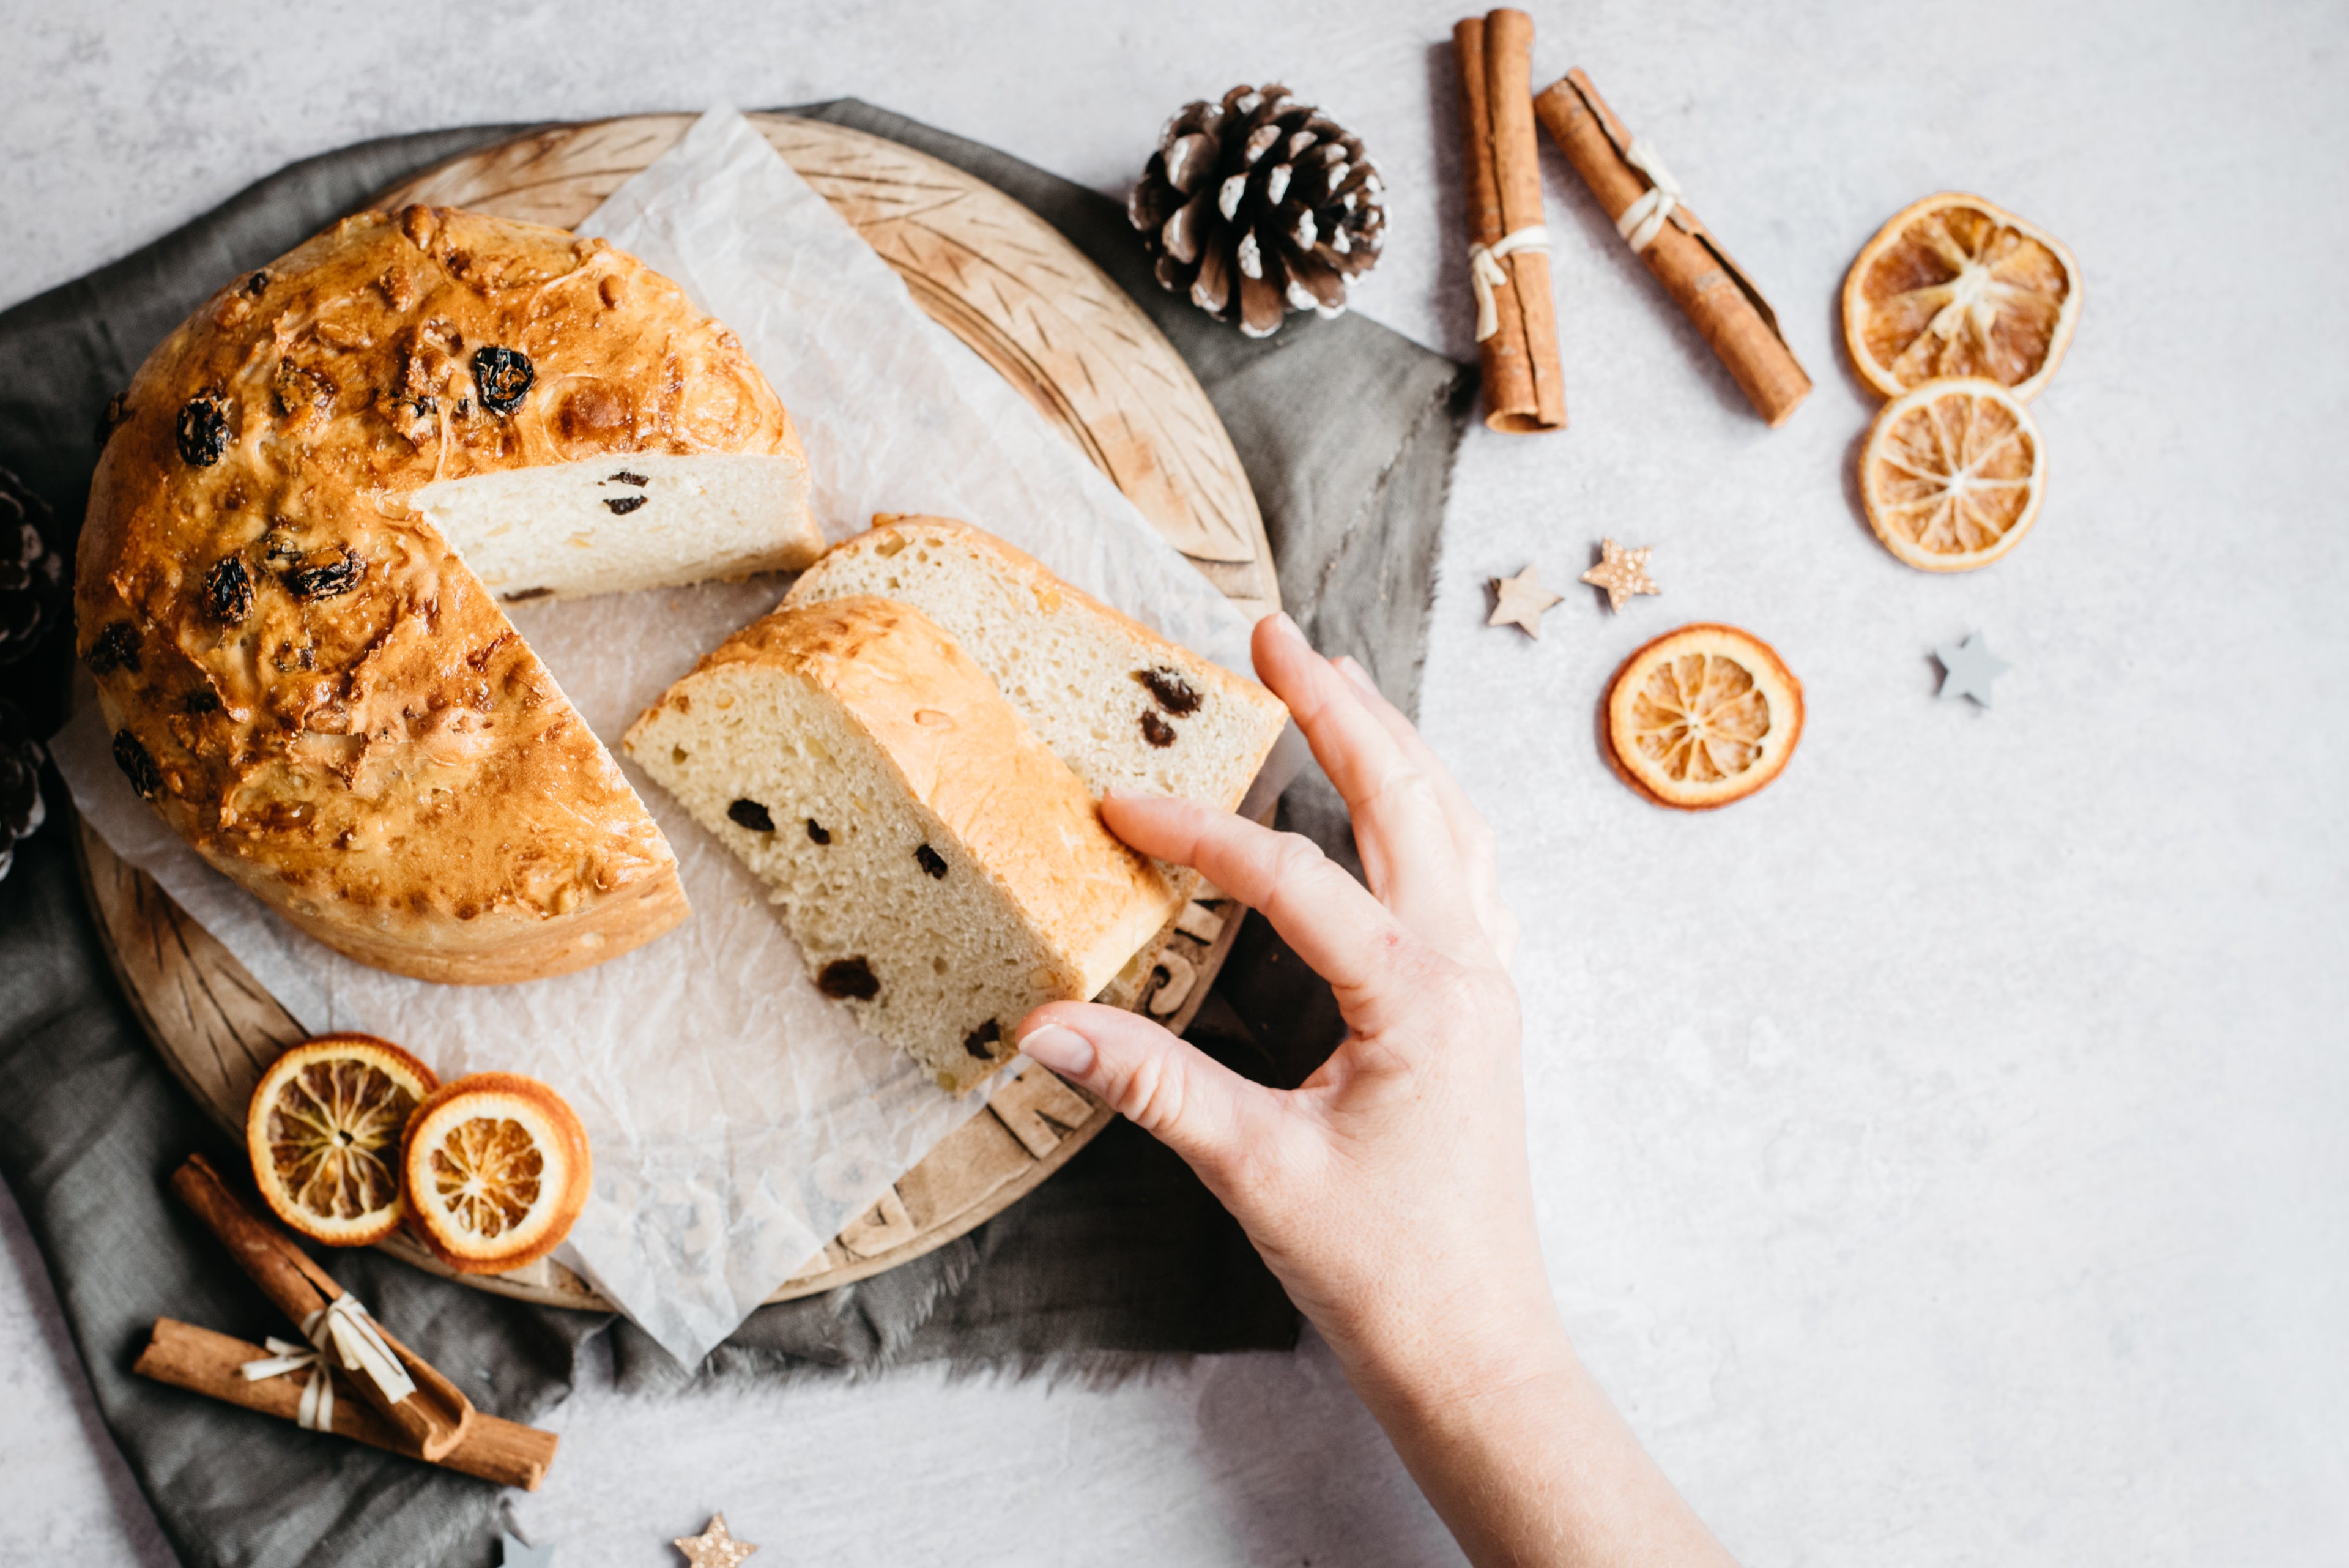 Hand reaching in for a slice of Panettone, made using Allinson's Strong White Flour